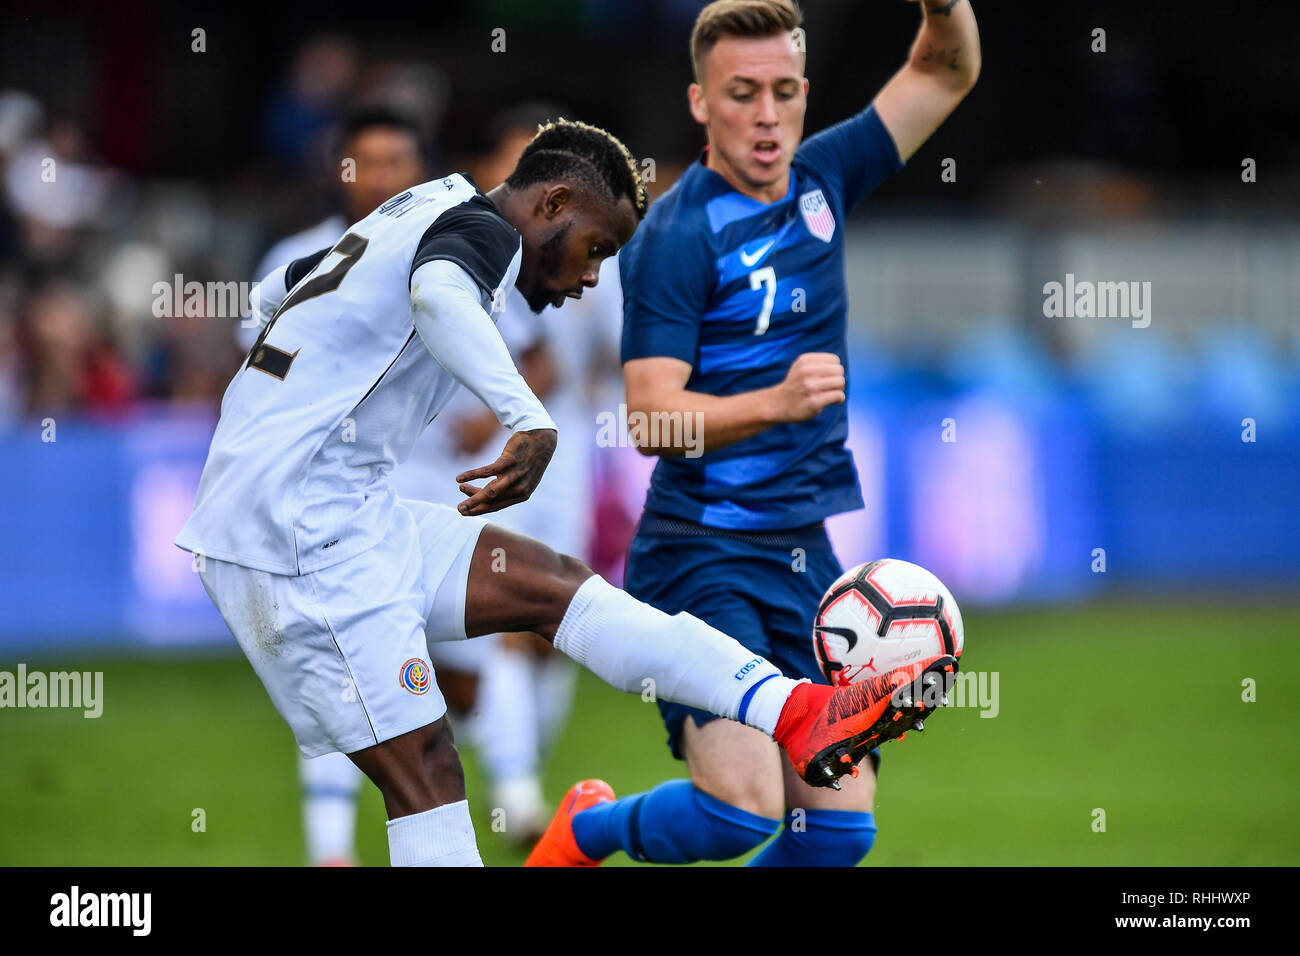 San Jose, California, USA. 2nd Feb, 2019. Costa Rica defender Waylon Francis (12) in action during the international friendly soccer match between Costa Rica and the United States at Avaya Stadium in San Jose, California. Chris Brown/CSM/Alamy Live News Stock Photo